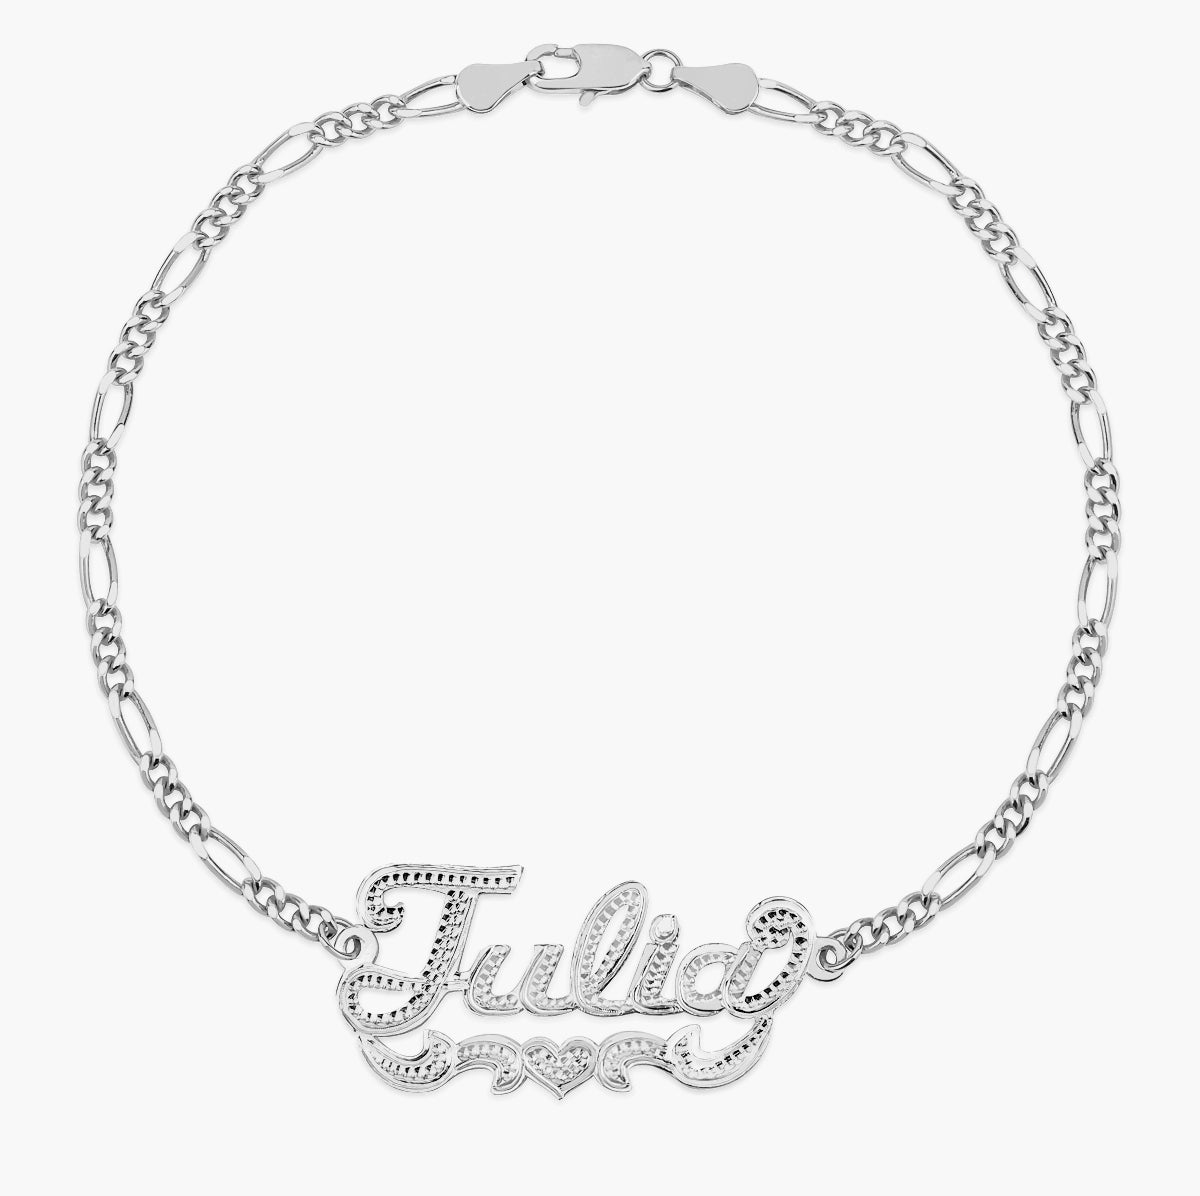 Engraved Personalized Skinny Long Bar Bangle – Mighty Dainty